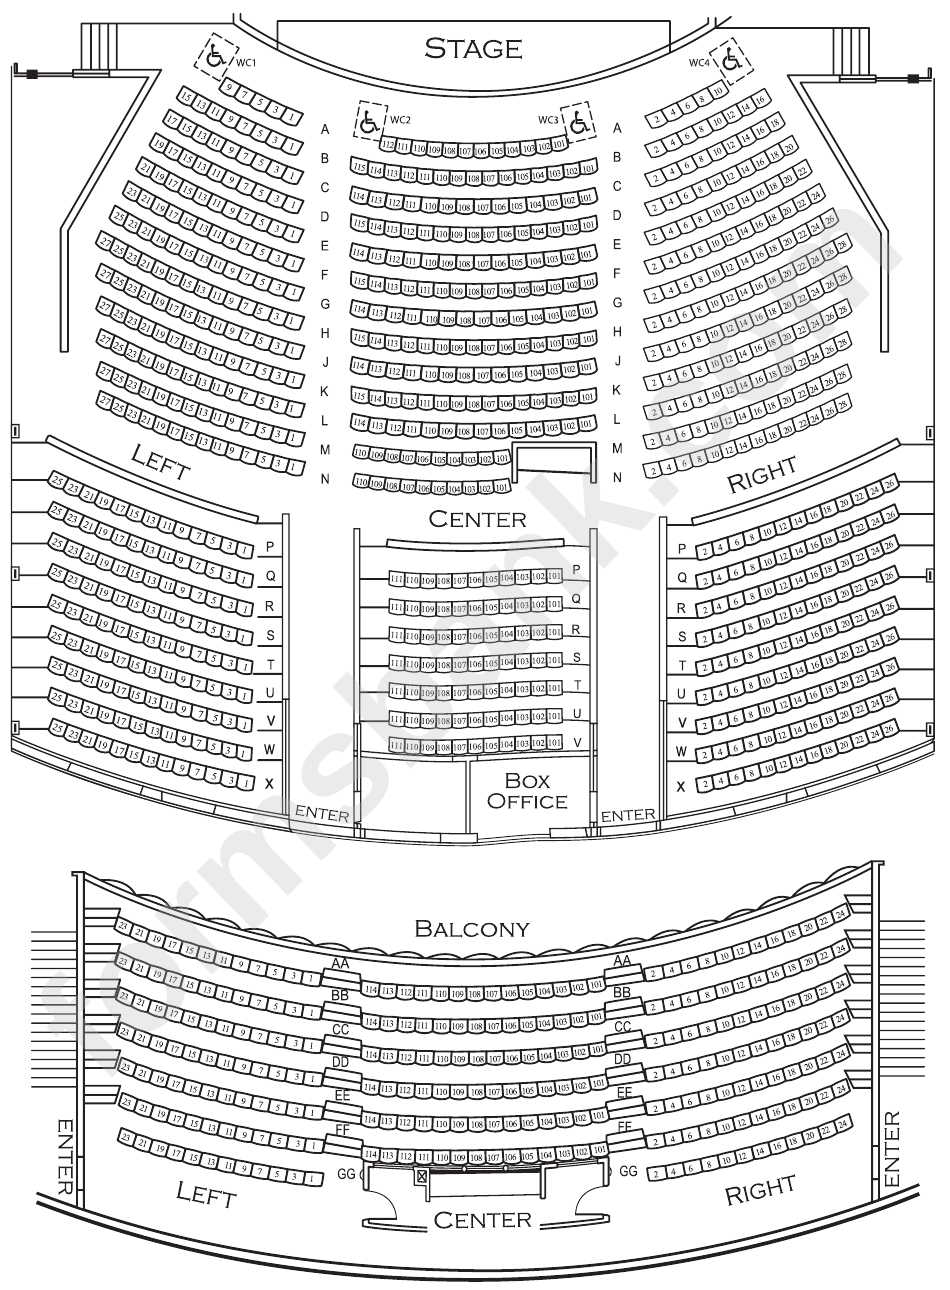 Sp Civic Theatre Seating Chart